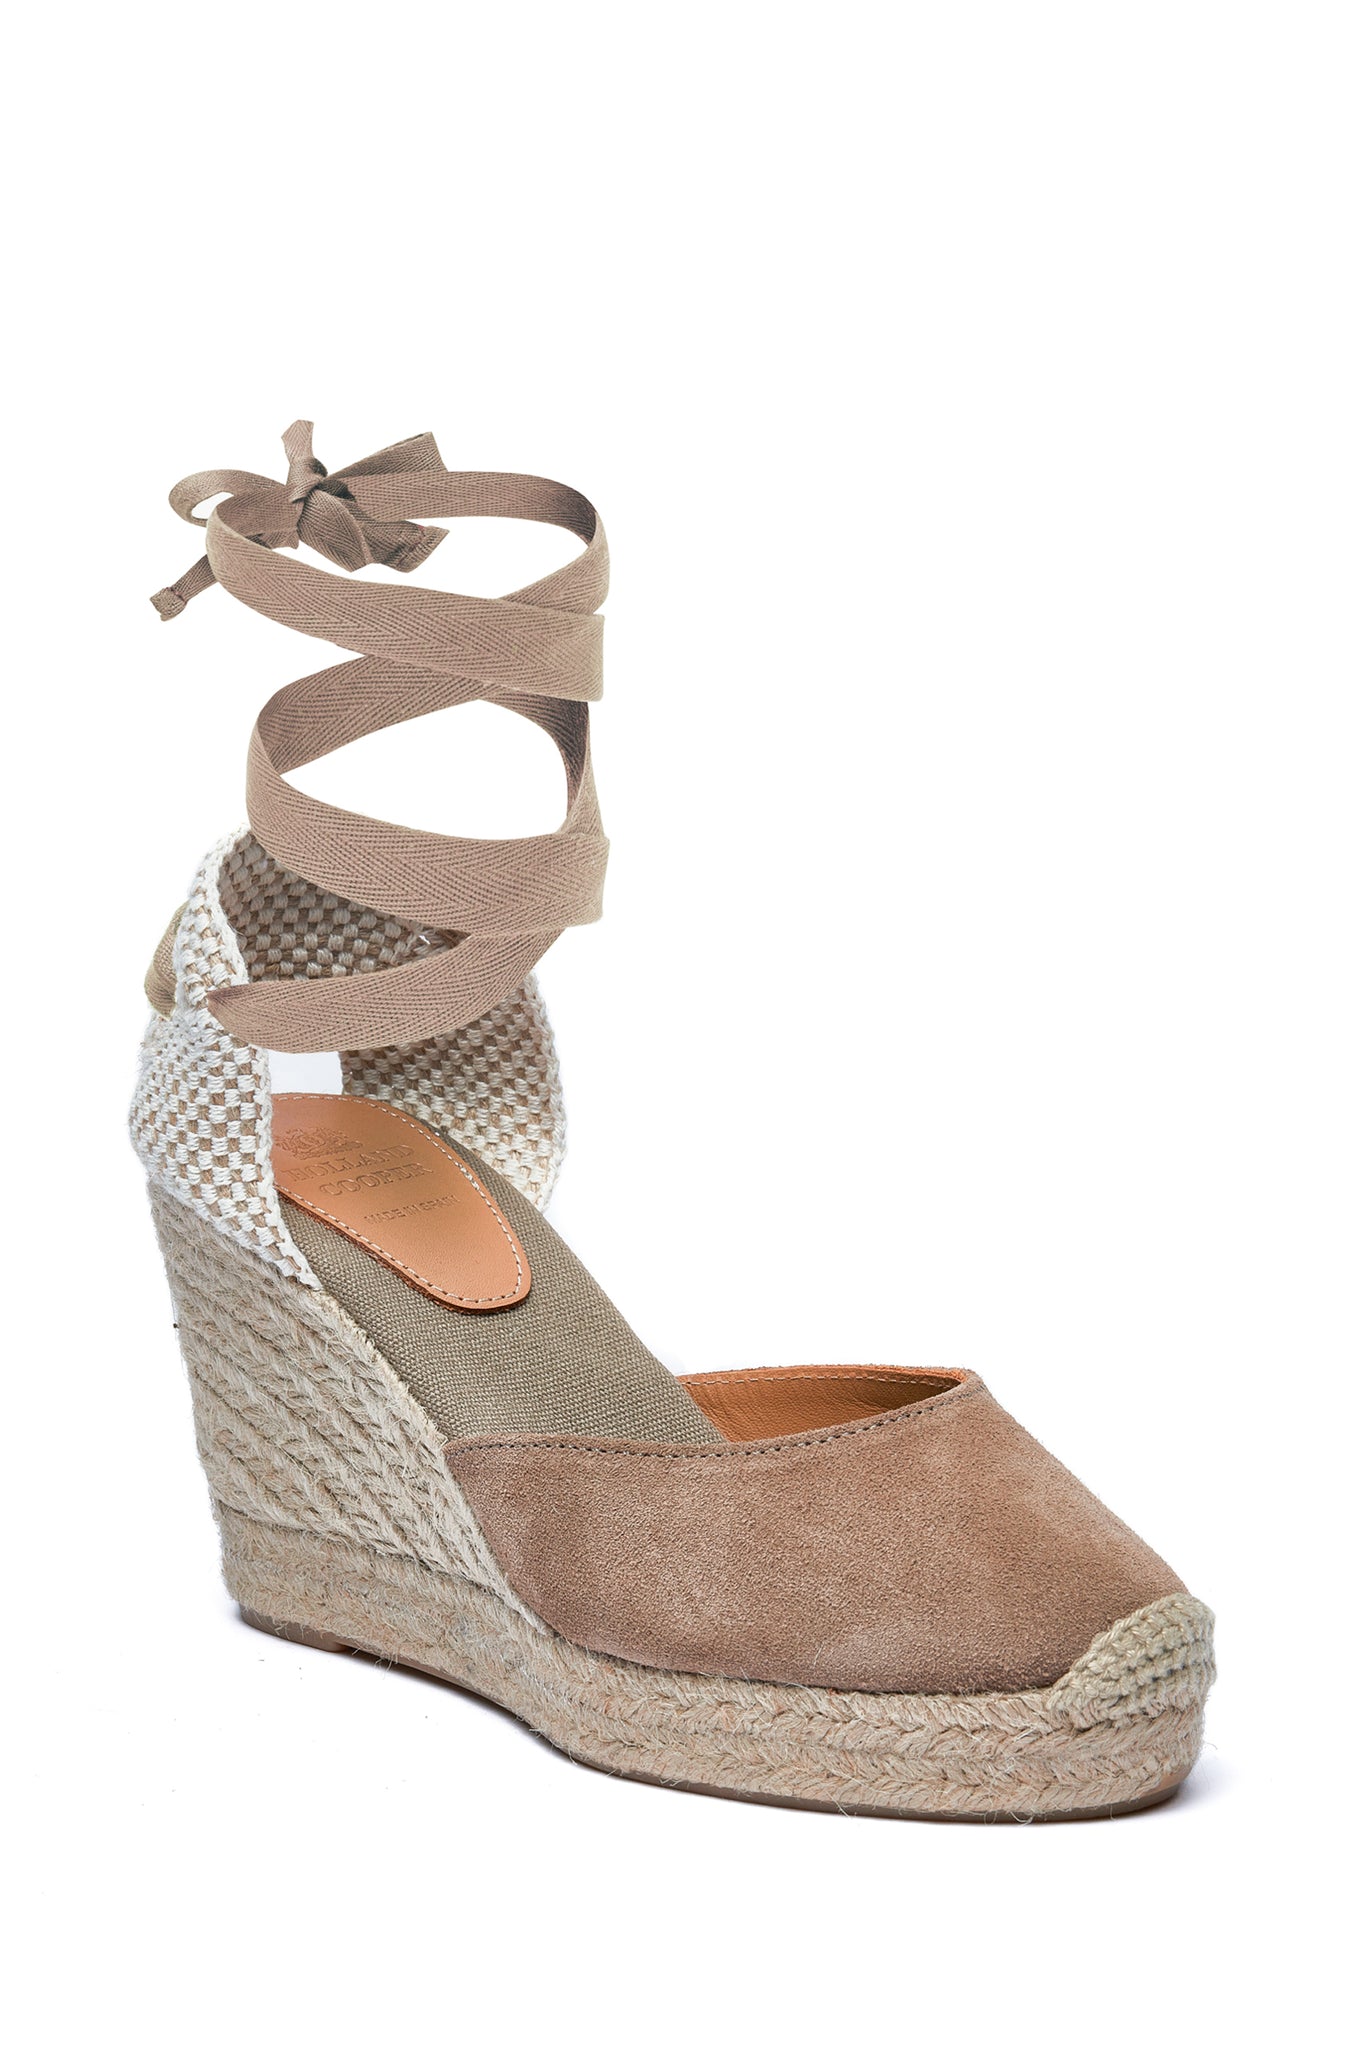 4 inch braided jute wedge heel with taupe suede top and tie up taupe ribbons around the ankle 